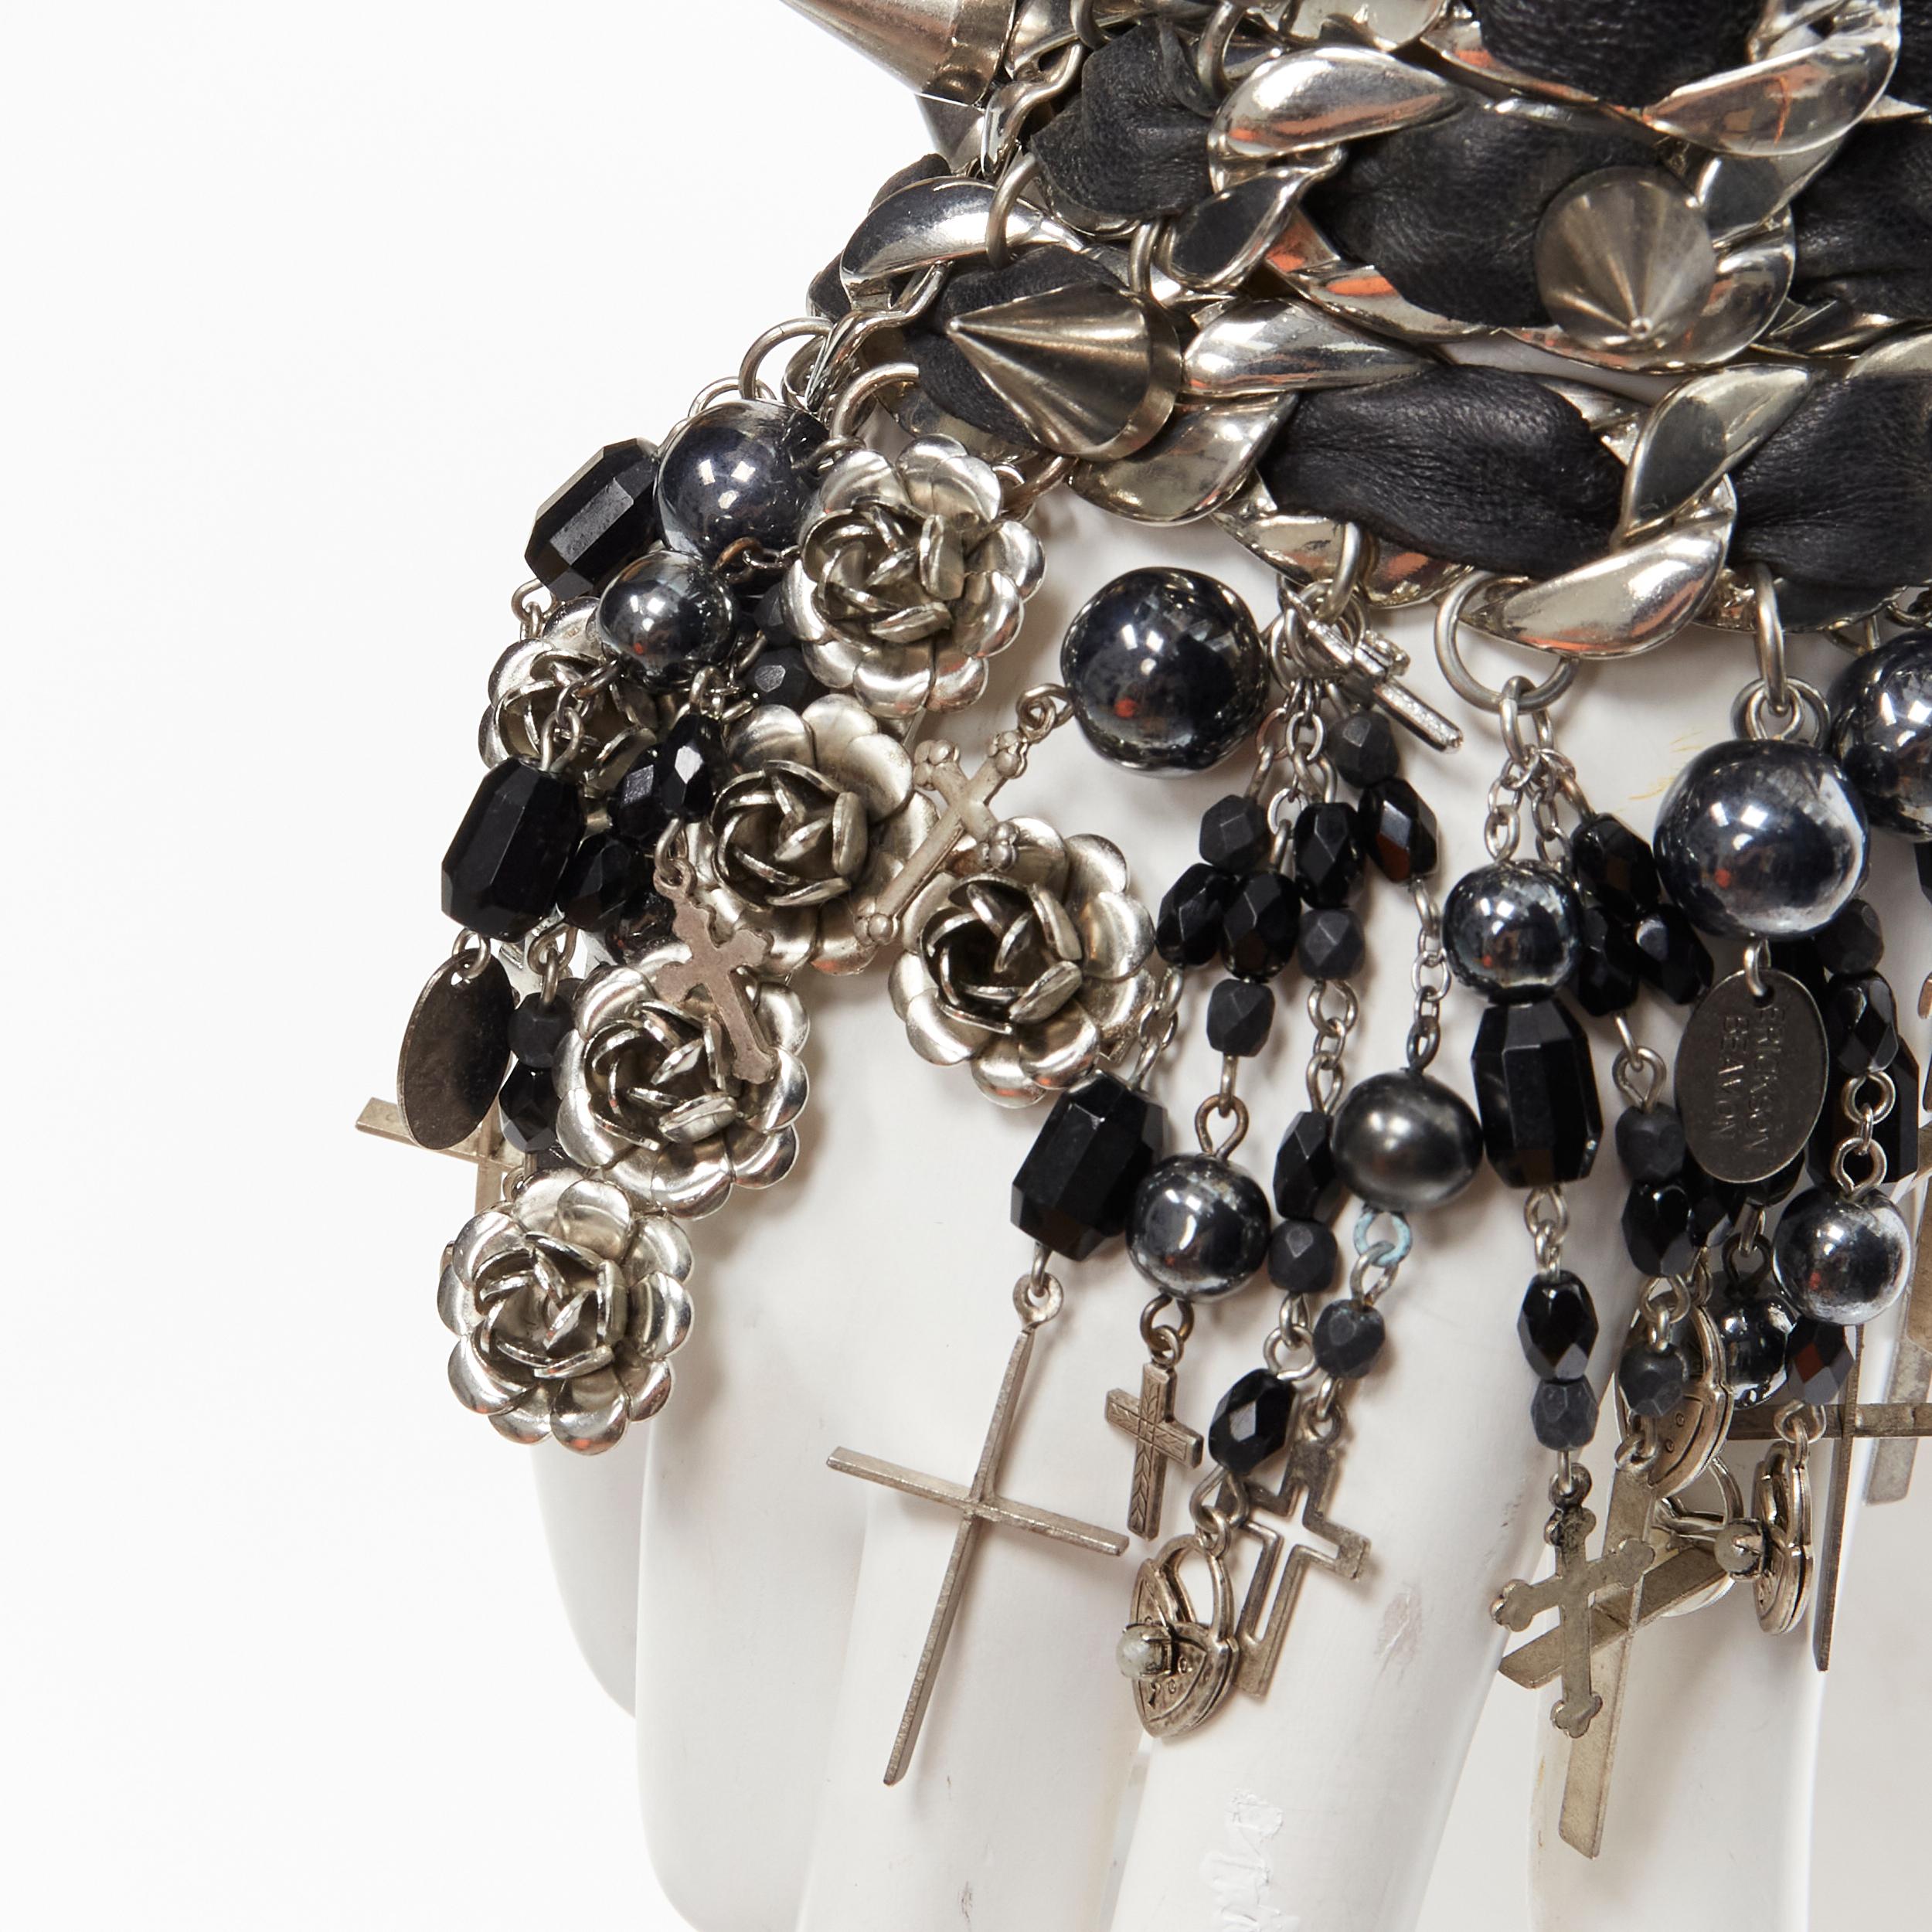 ERICKSON BEAMON black leather silver chain flower cross punk wide bracelet
Reference: ANWU/A00270
Brand: Erickson Beamon
Material: Leather, Metal
Color: Black, Silver
Closure: Lobster Clasp
Extra Details: Silver 3D flower cross, mini crosses and